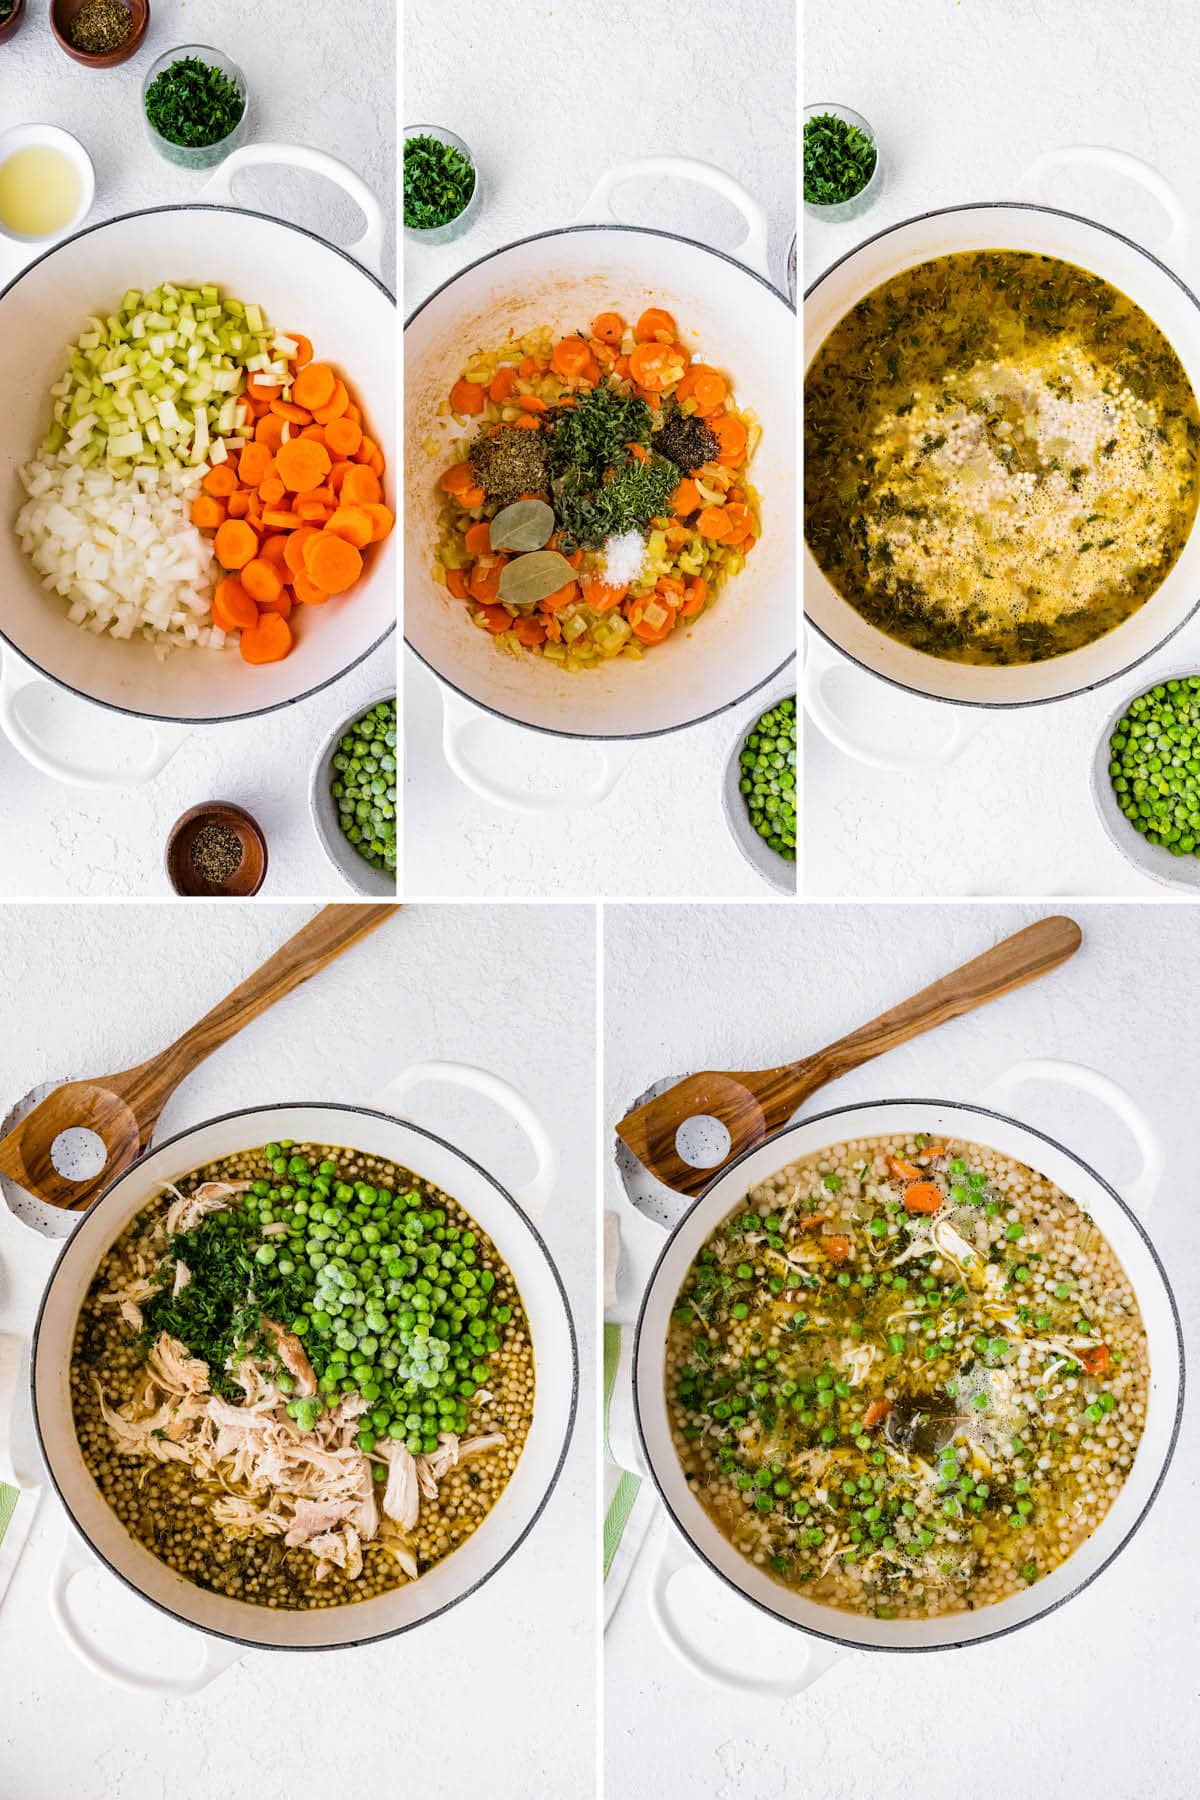 Collage of five photos showing the steps to make Turkey Soup: cooking the carrots, celery and onion, adding herbs, broth, couscous, peas and shredded turkey.